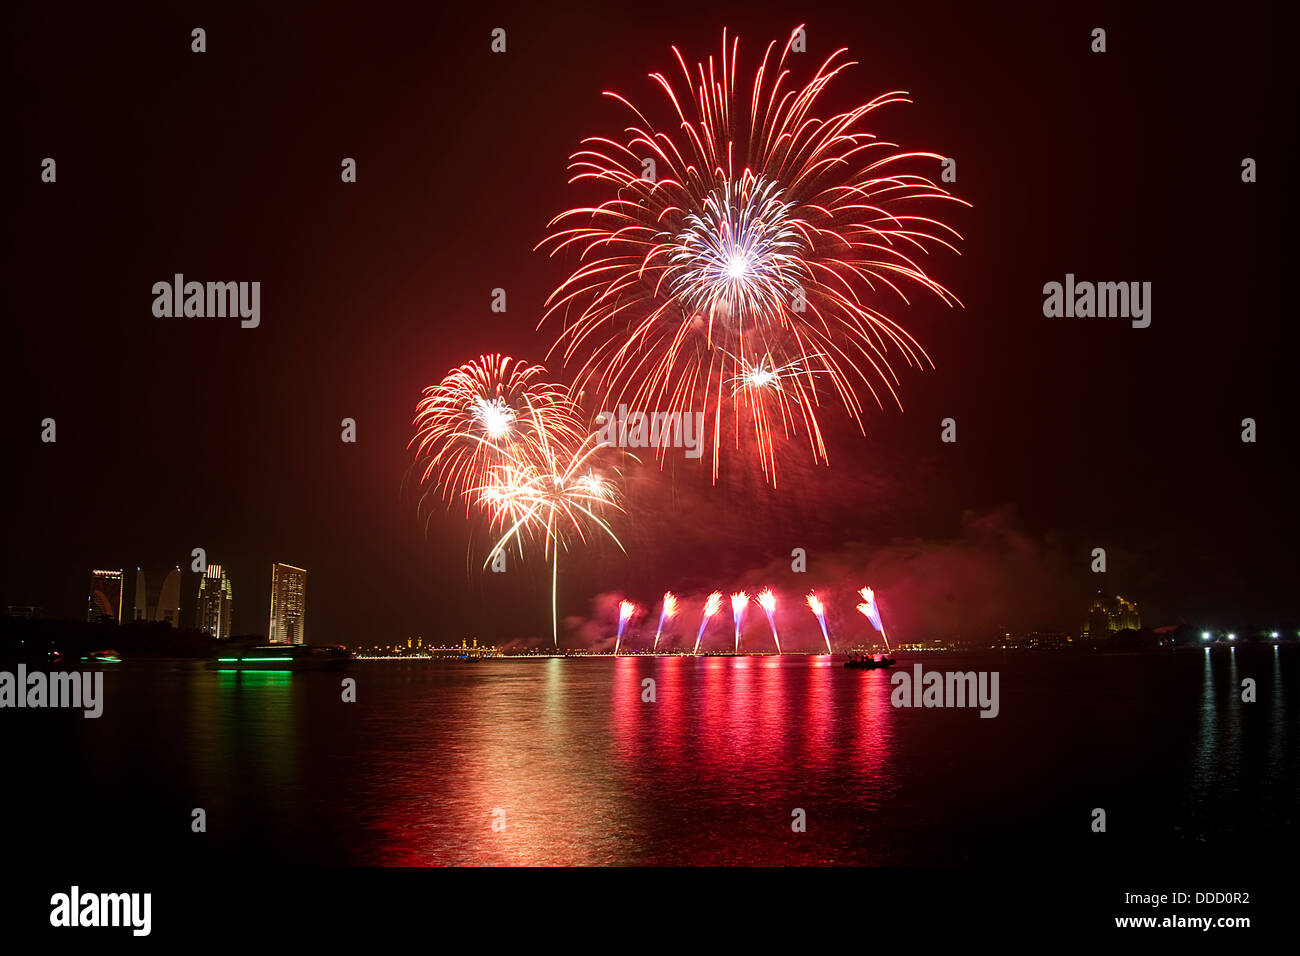 Fireworks display at the International Fireworks Competition in Putrajaya, Malaysia on August 30 to October 2, 2013 Stock Photo